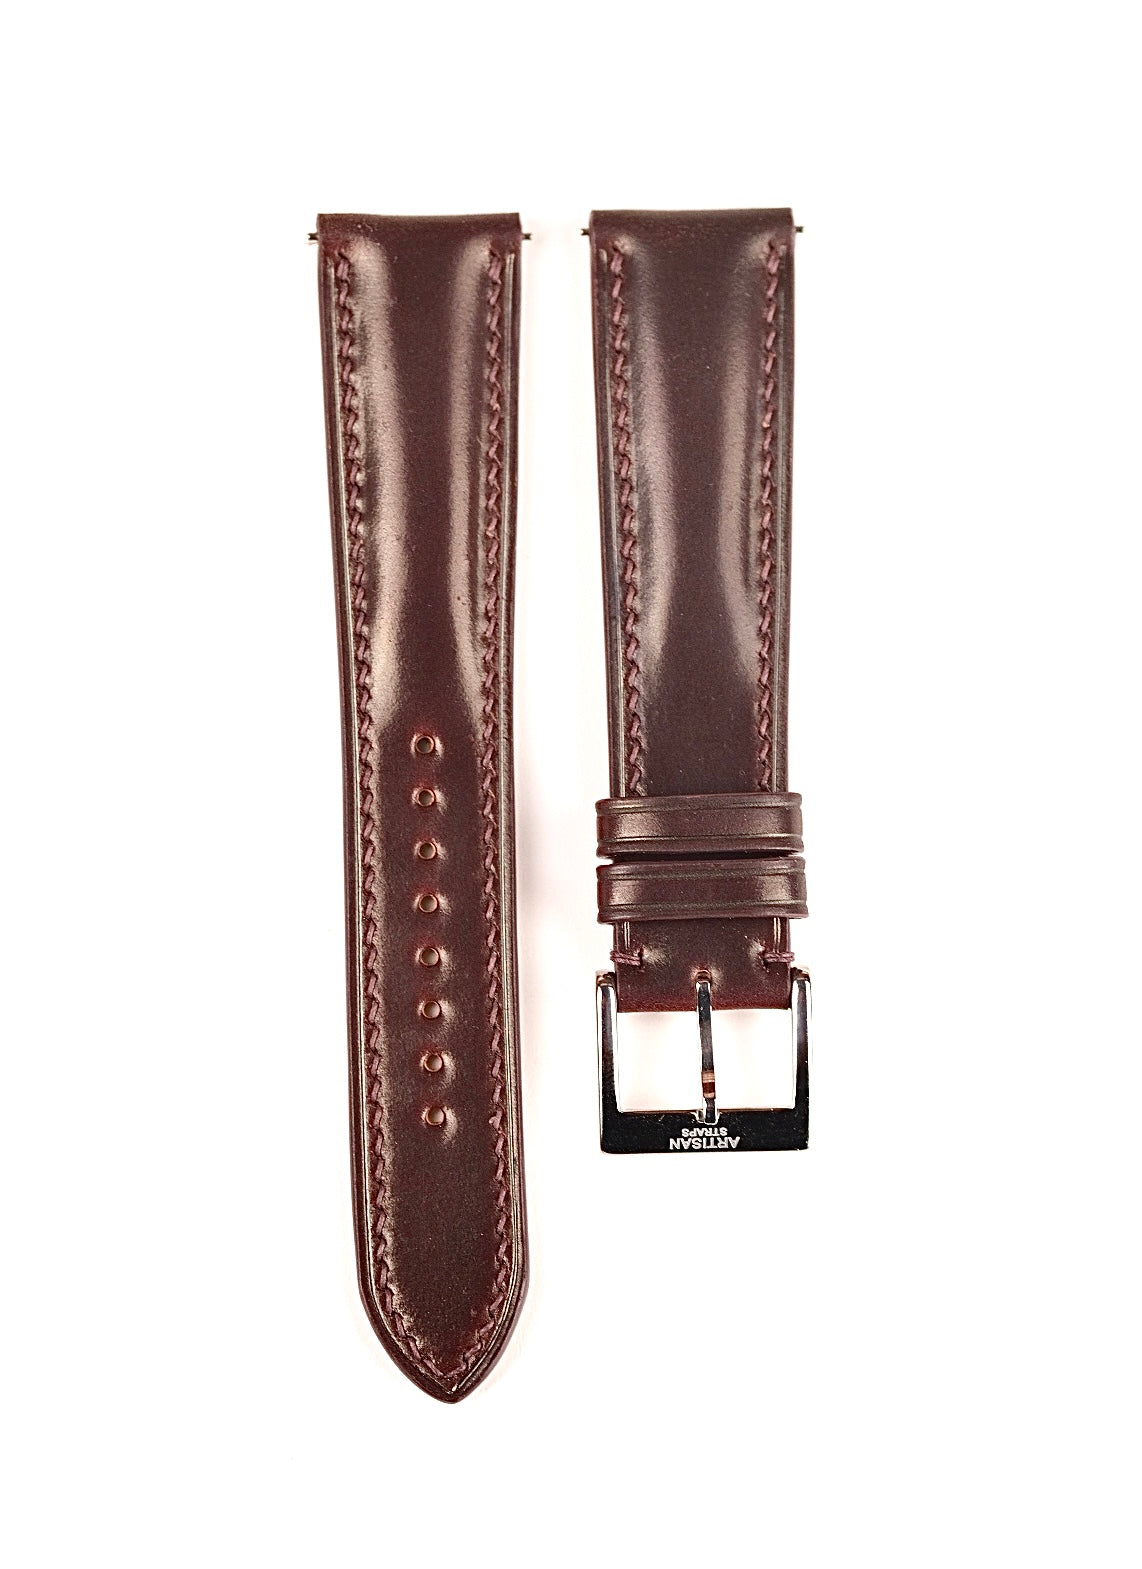 Colour 8 Horween Shell Cordovan (Padded) Leather Strap - Artisan Straps